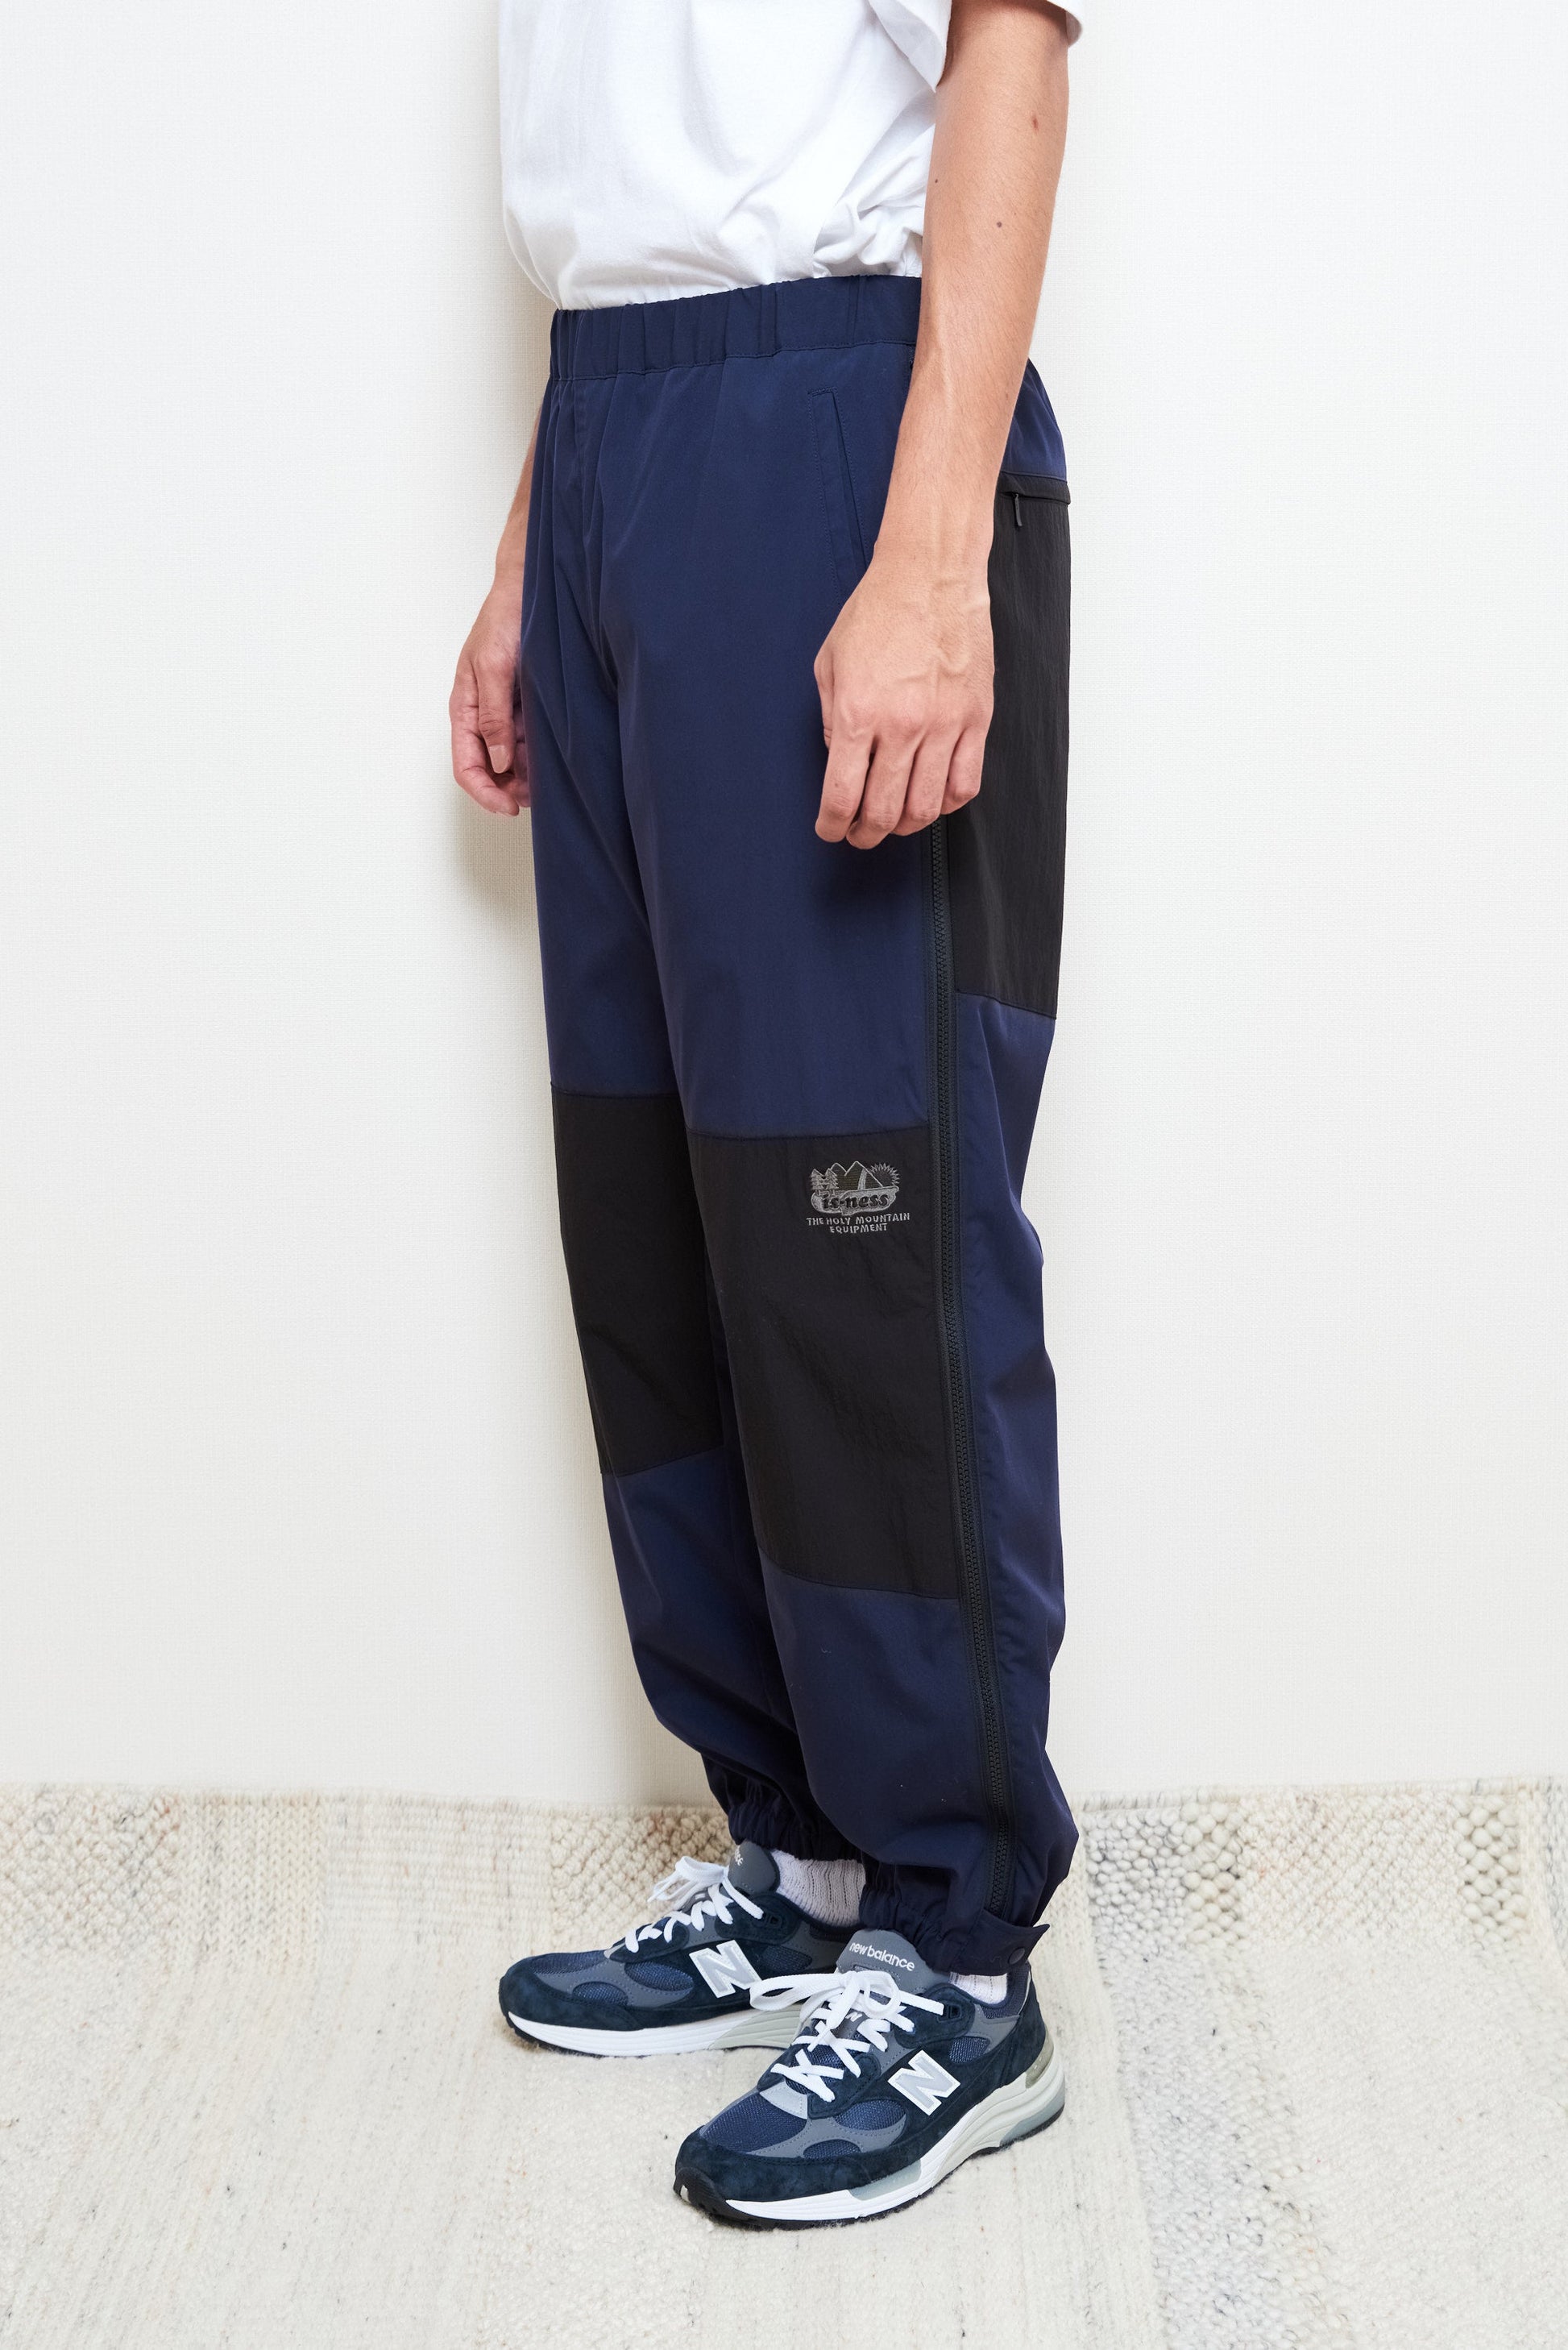 THE HOLY MOUNTAIN VENTILATION PANTS is-ness online shop 4